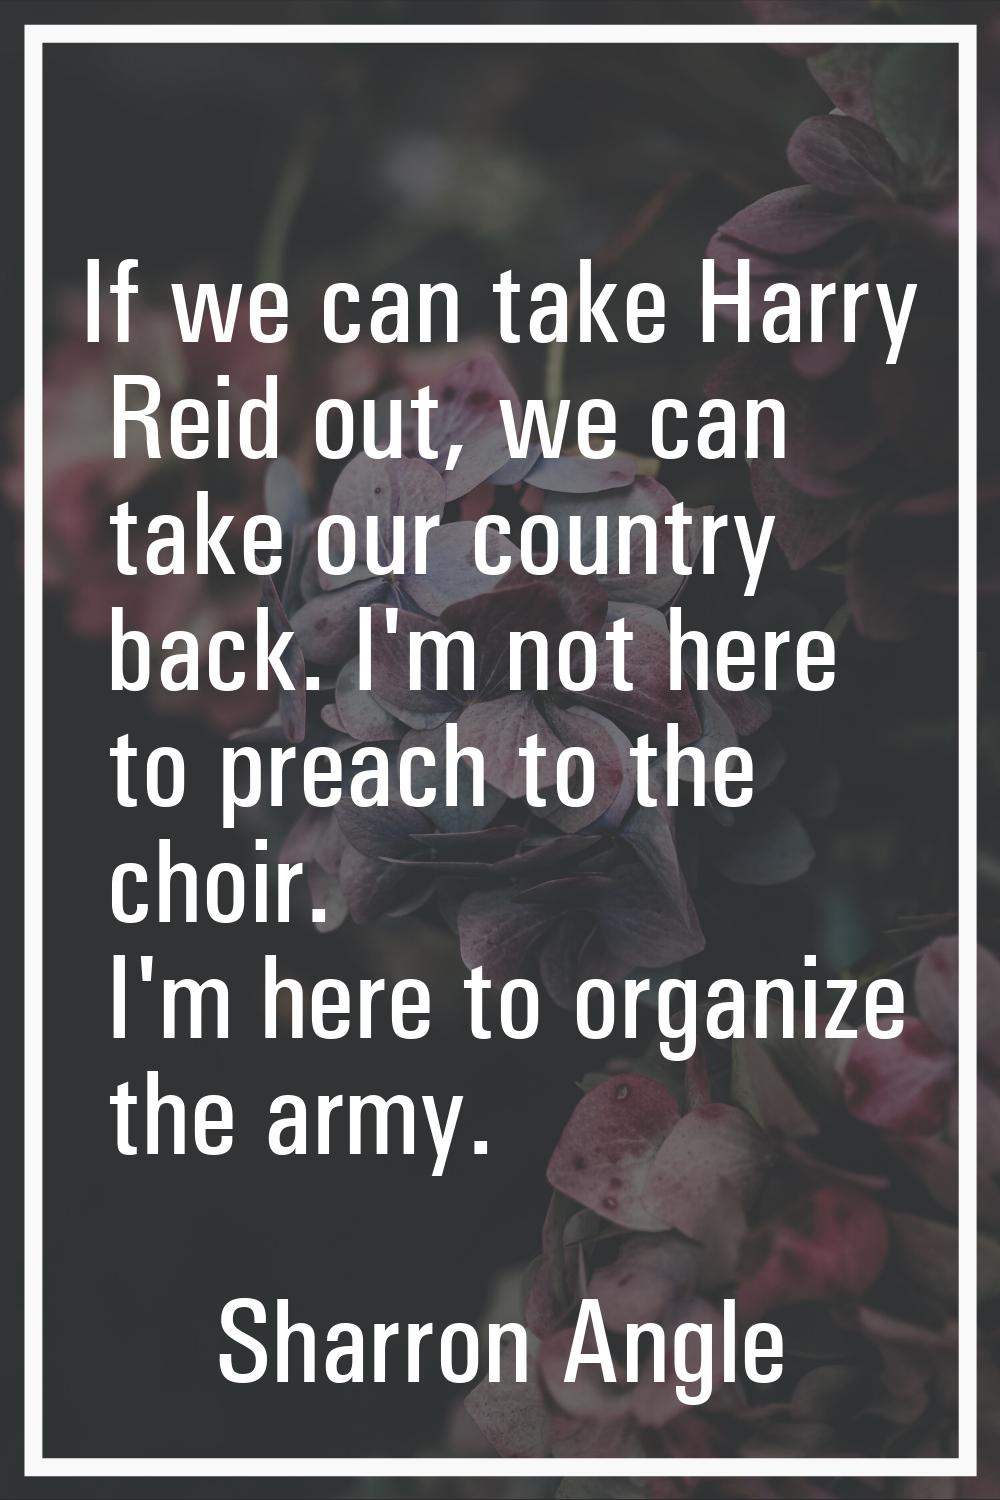 If we can take Harry Reid out, we can take our country back. I'm not here to preach to the choir. I